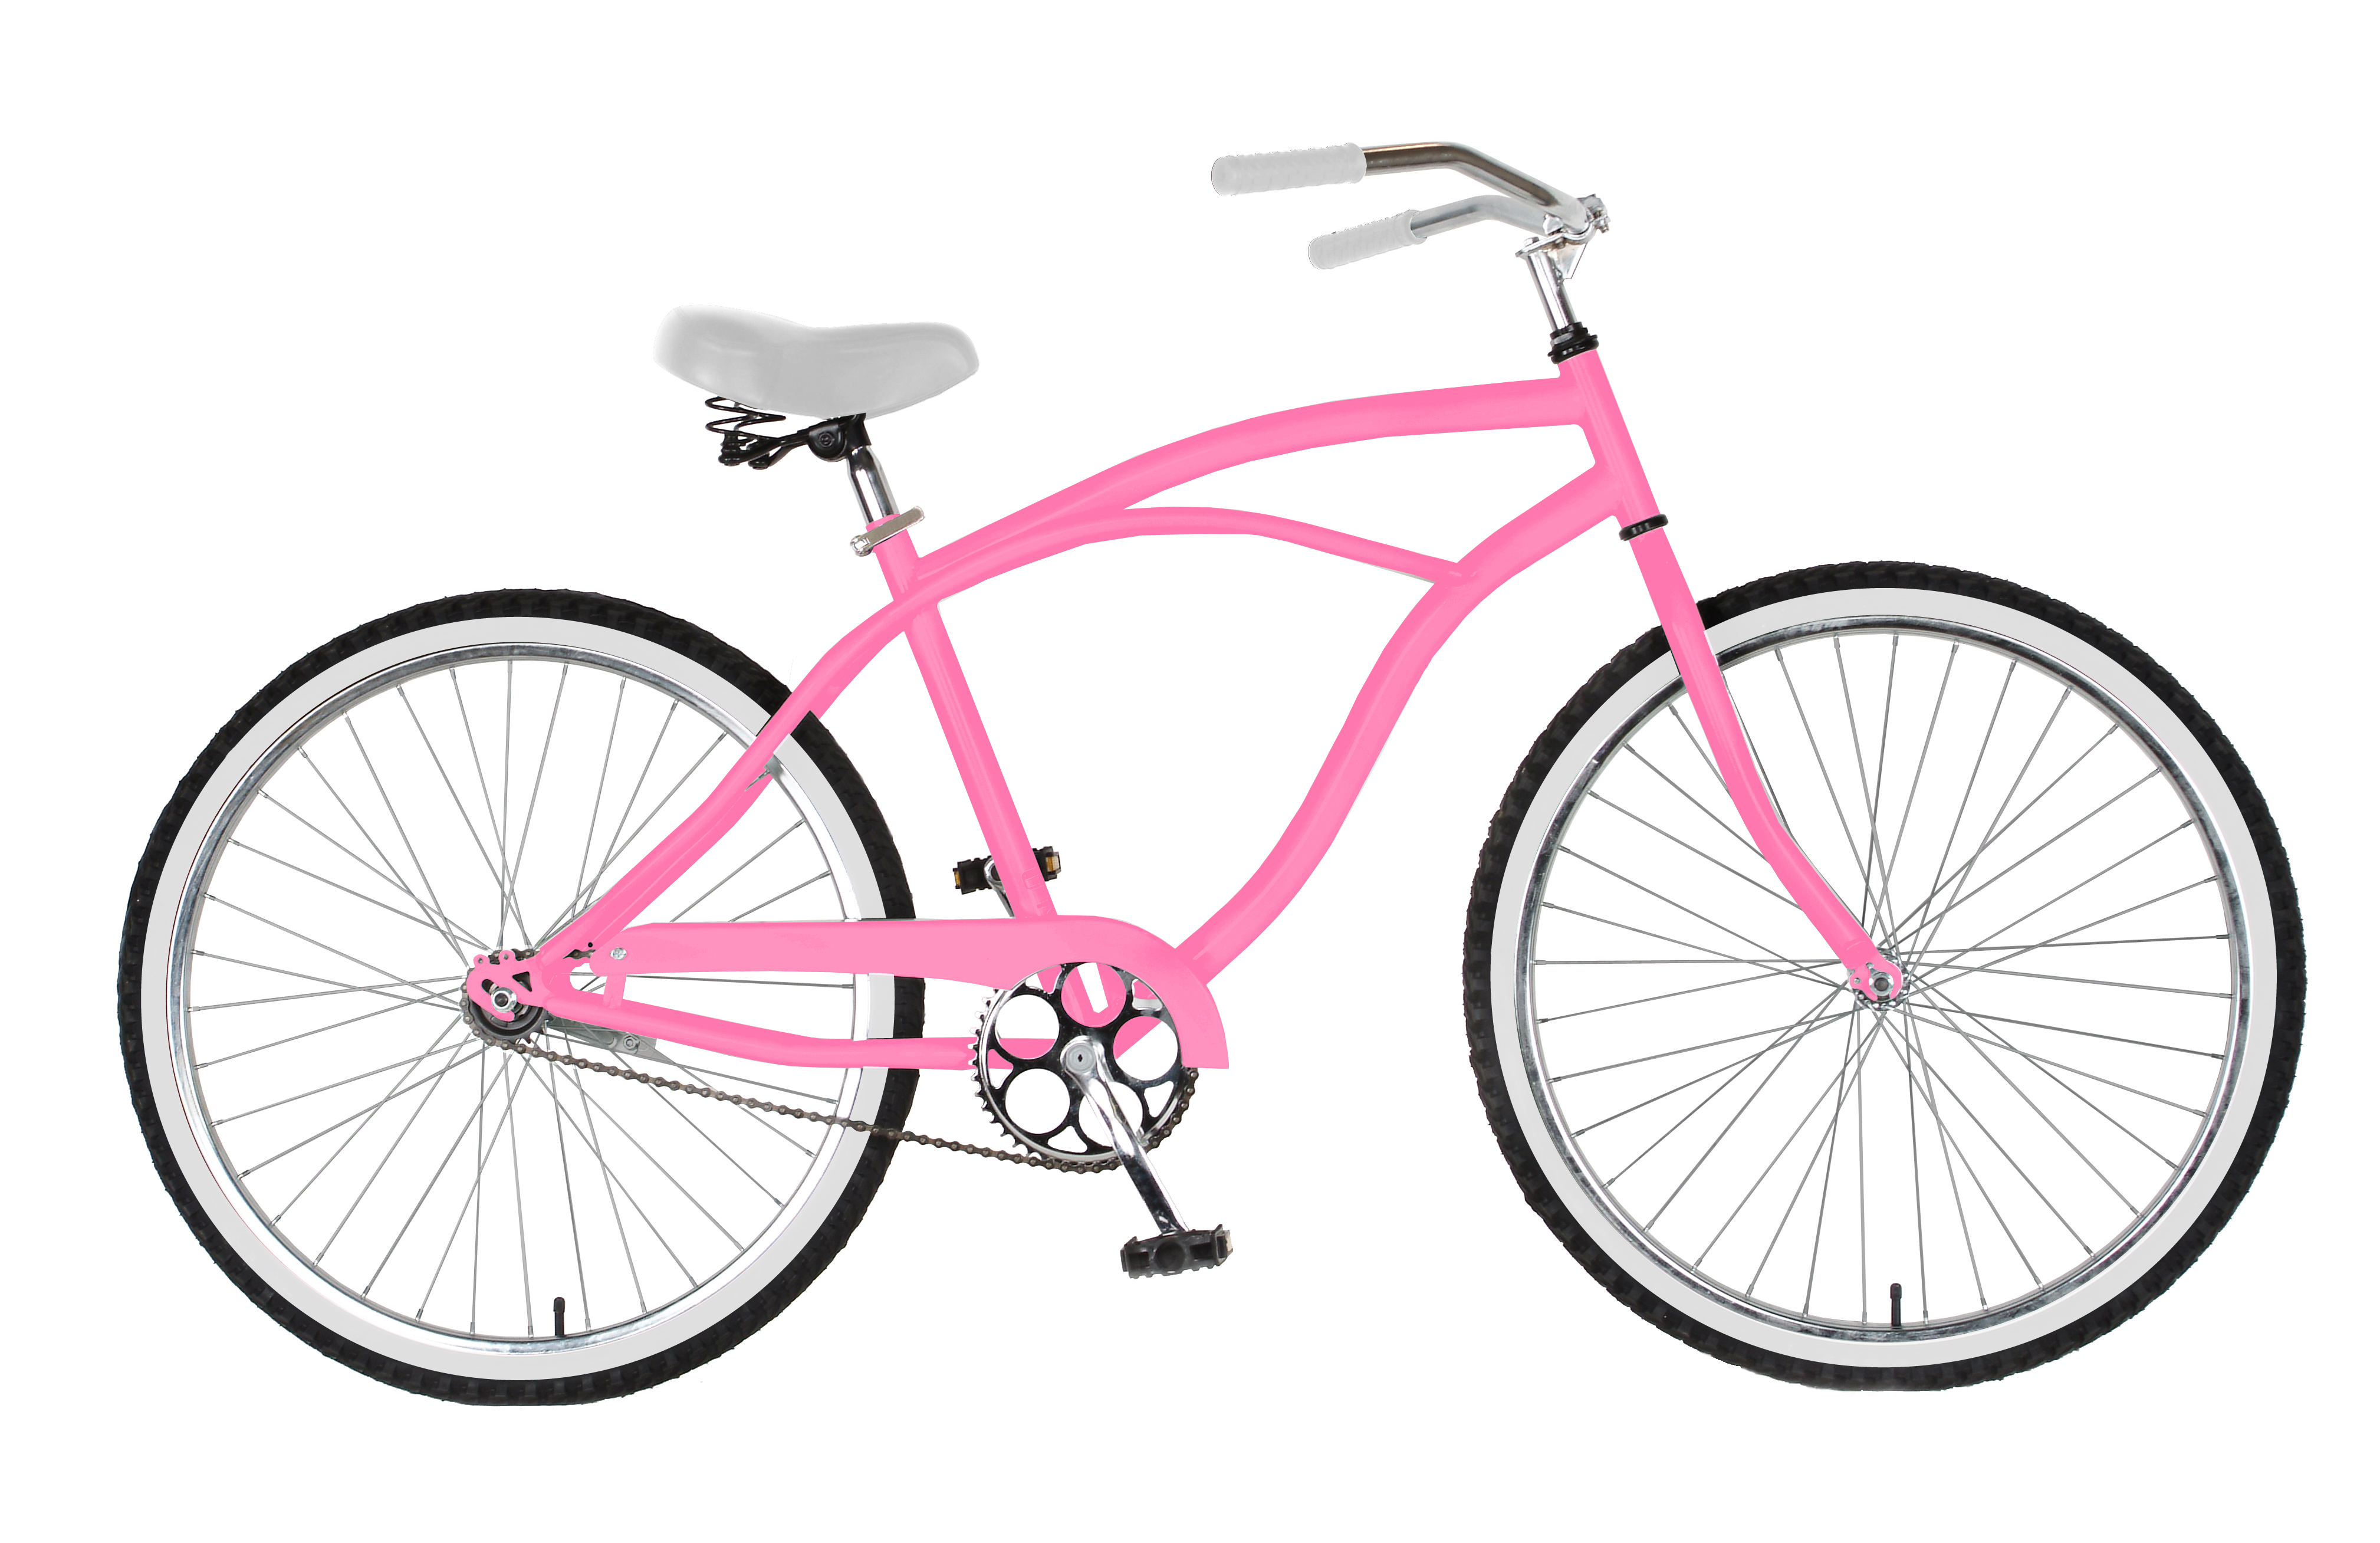 Cycle Force Group 26 inch Men's Cruiser Bike, Pink